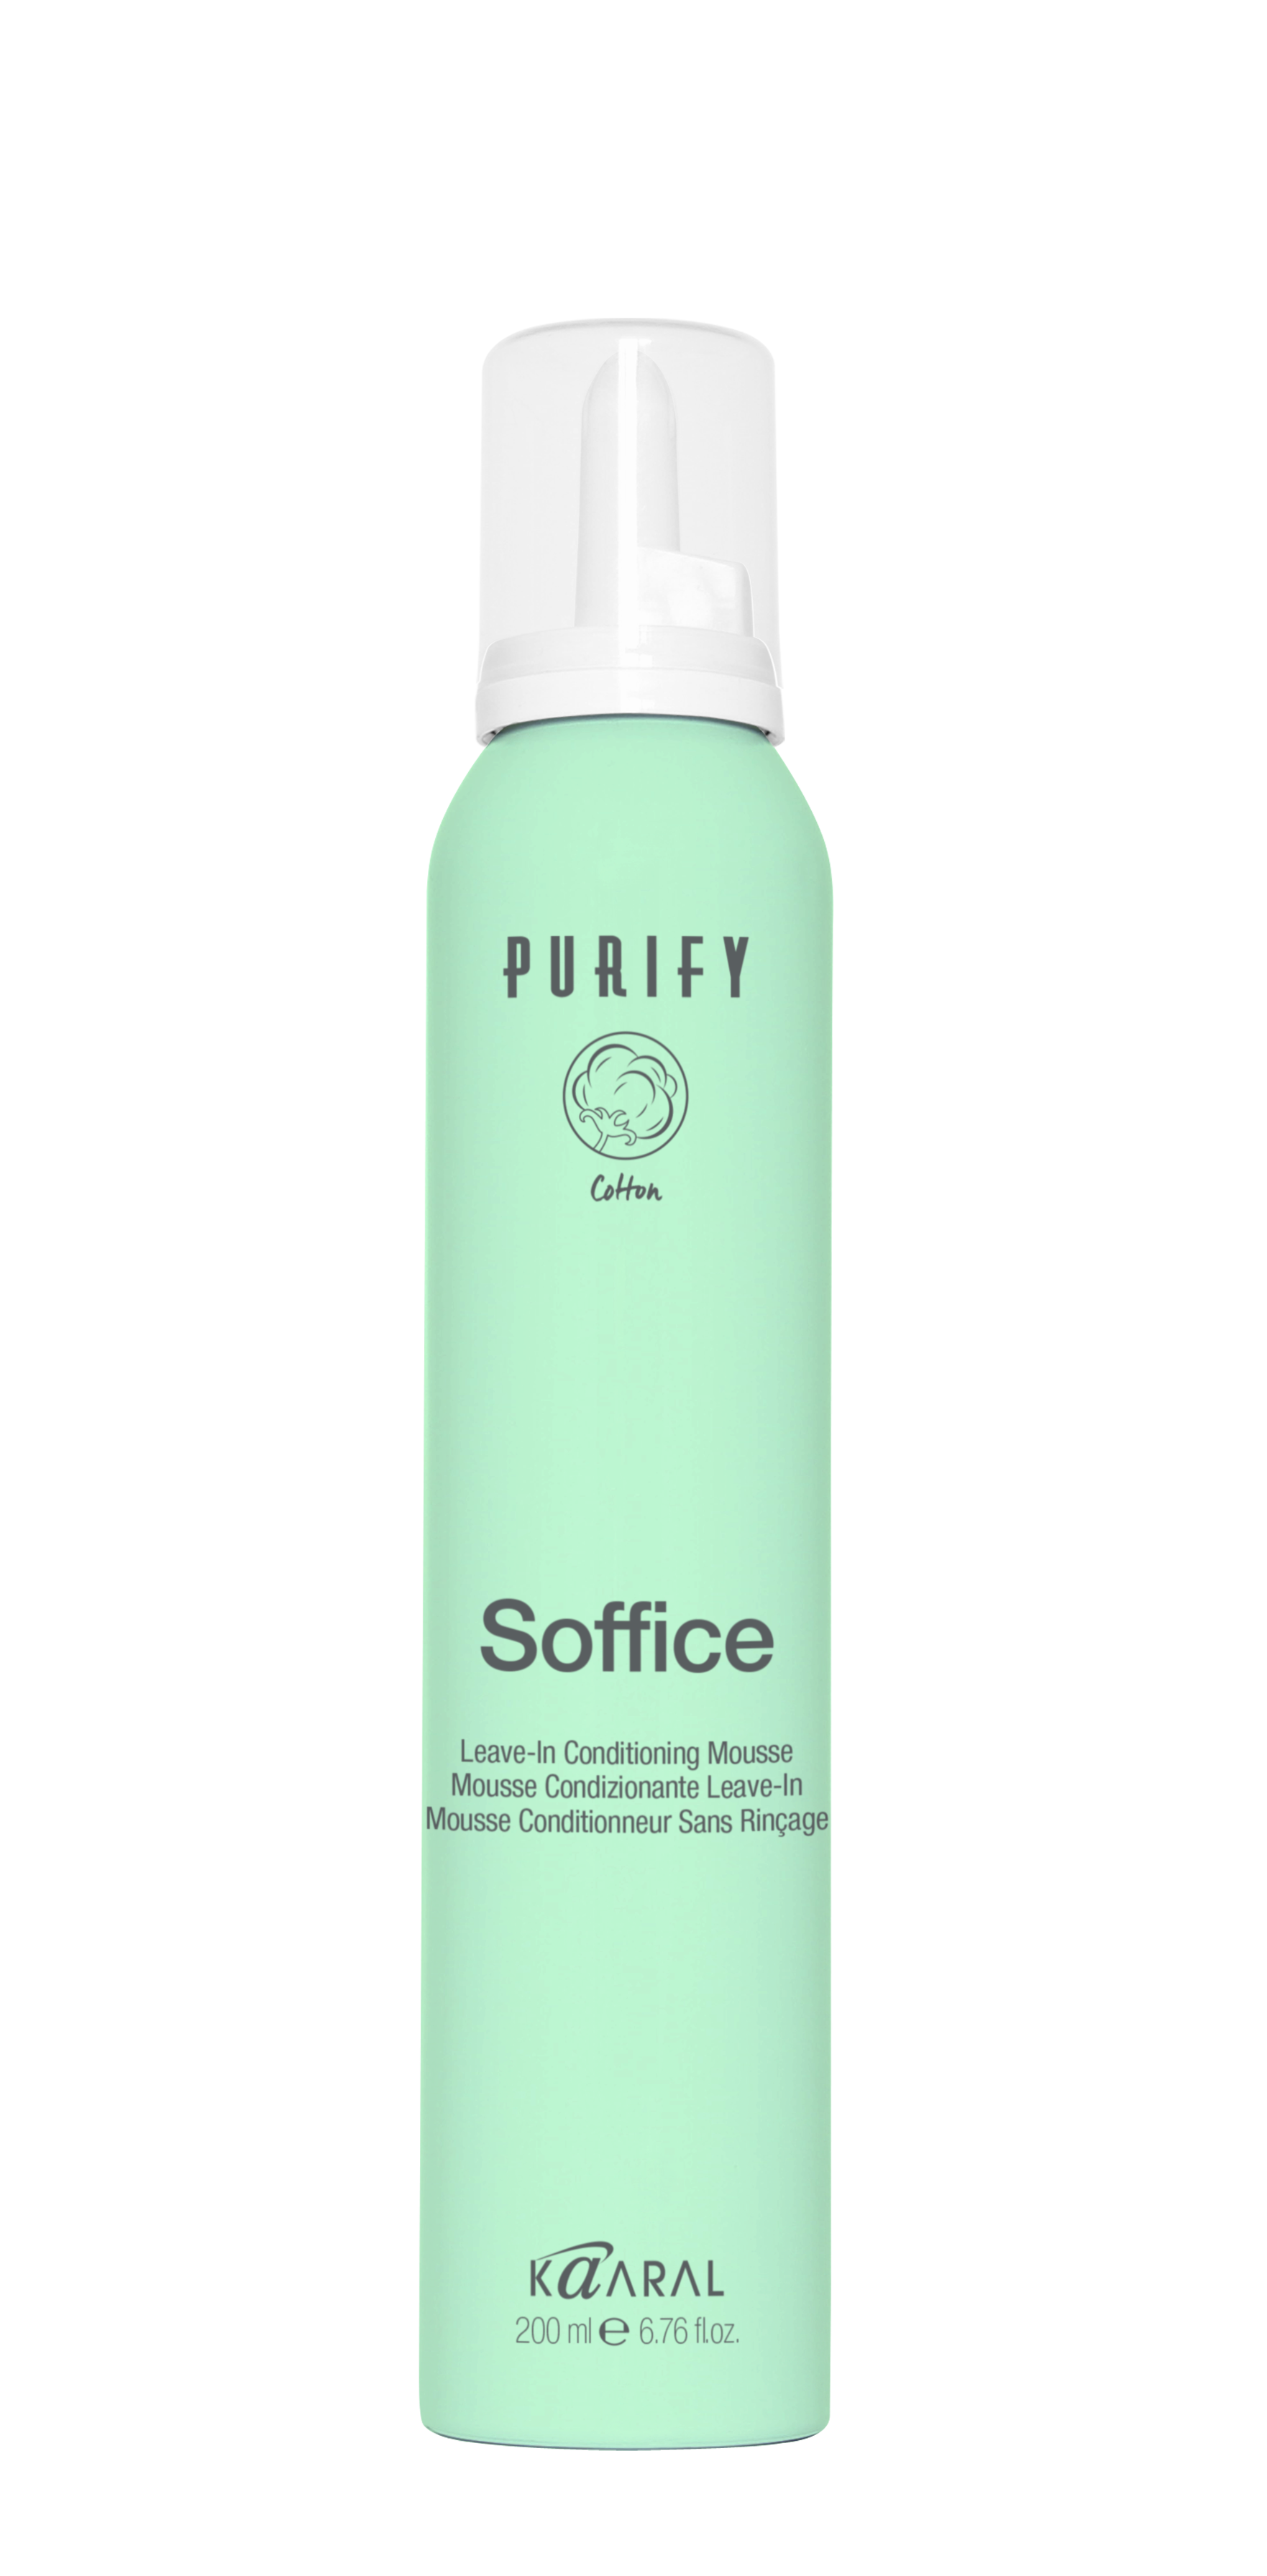 PURIFY Soffice Leave-In Conditioning Mousse by KAARAL